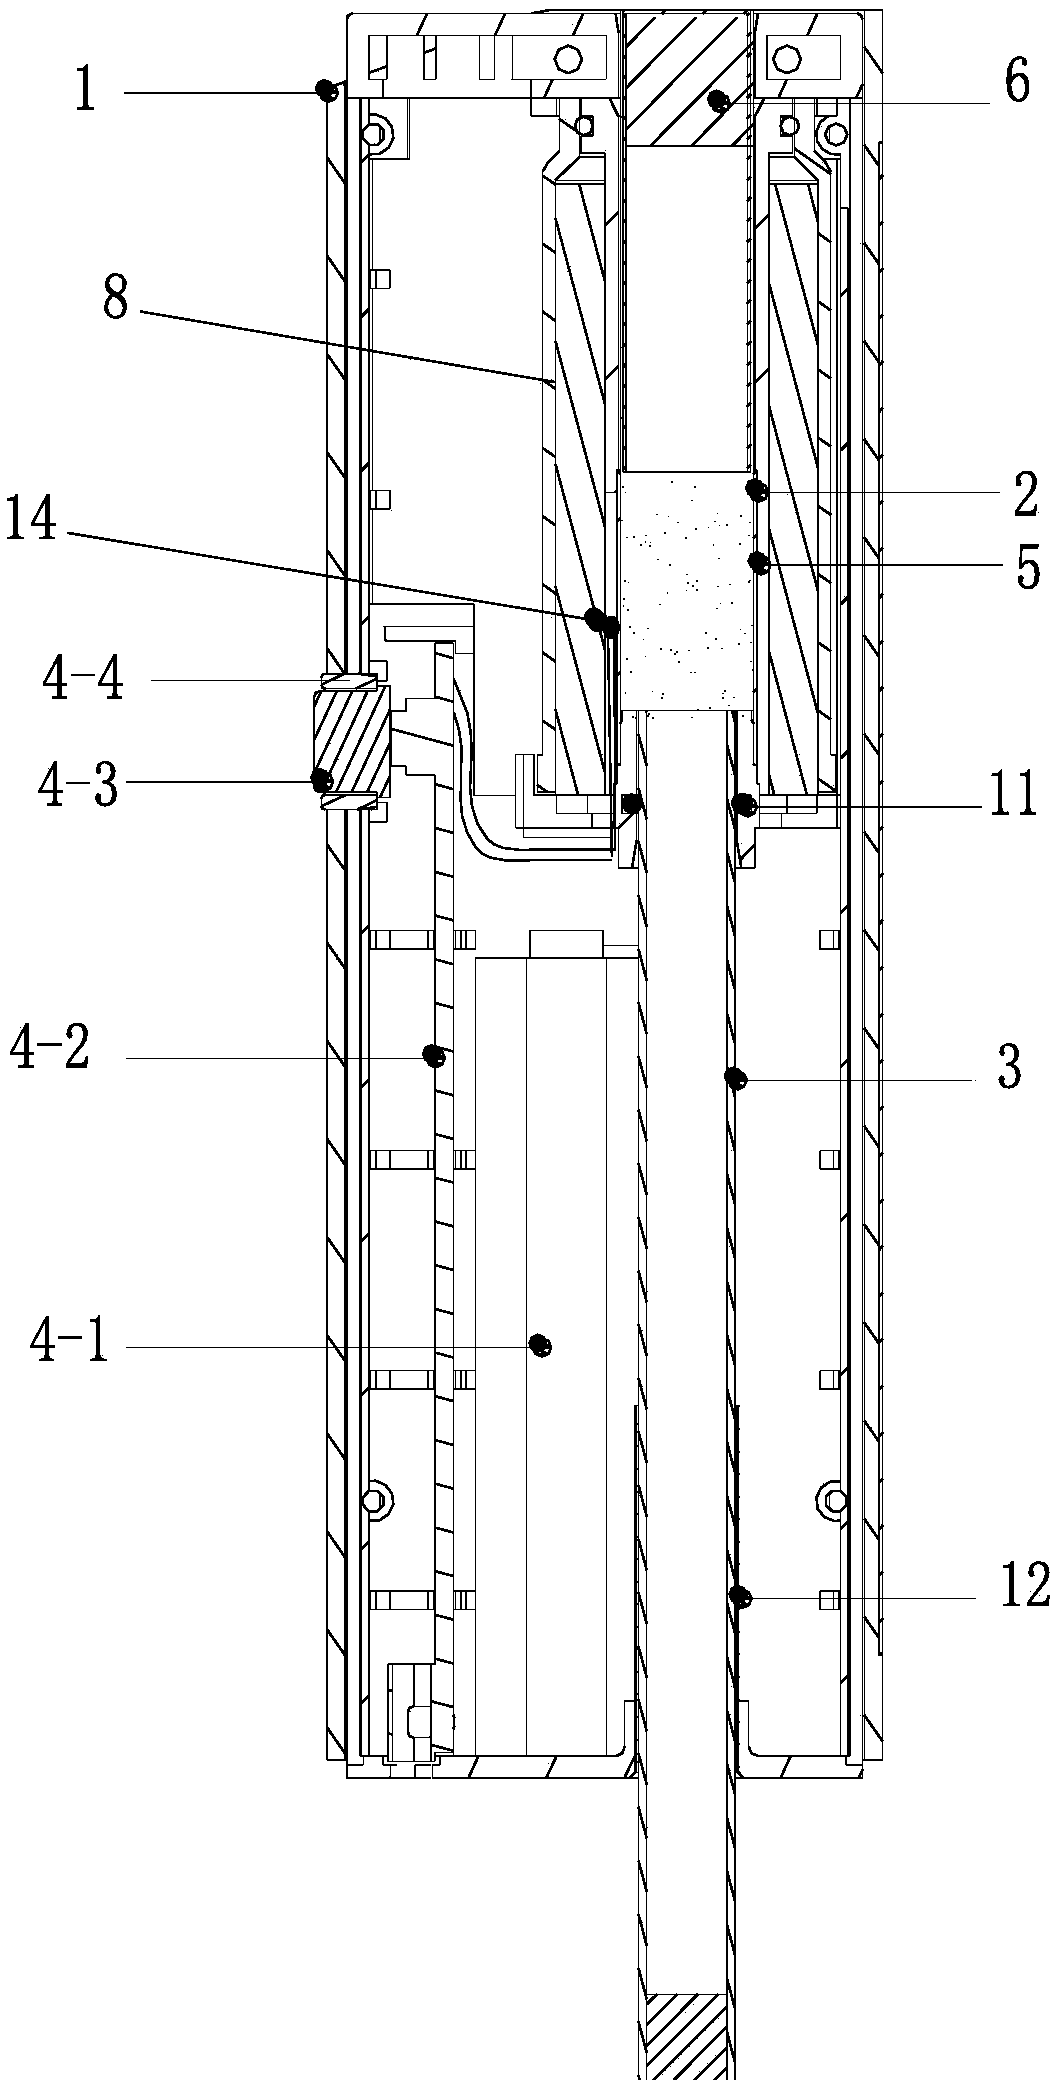 Low temperature smoking device with two-way ejection of air pipe and cigarette